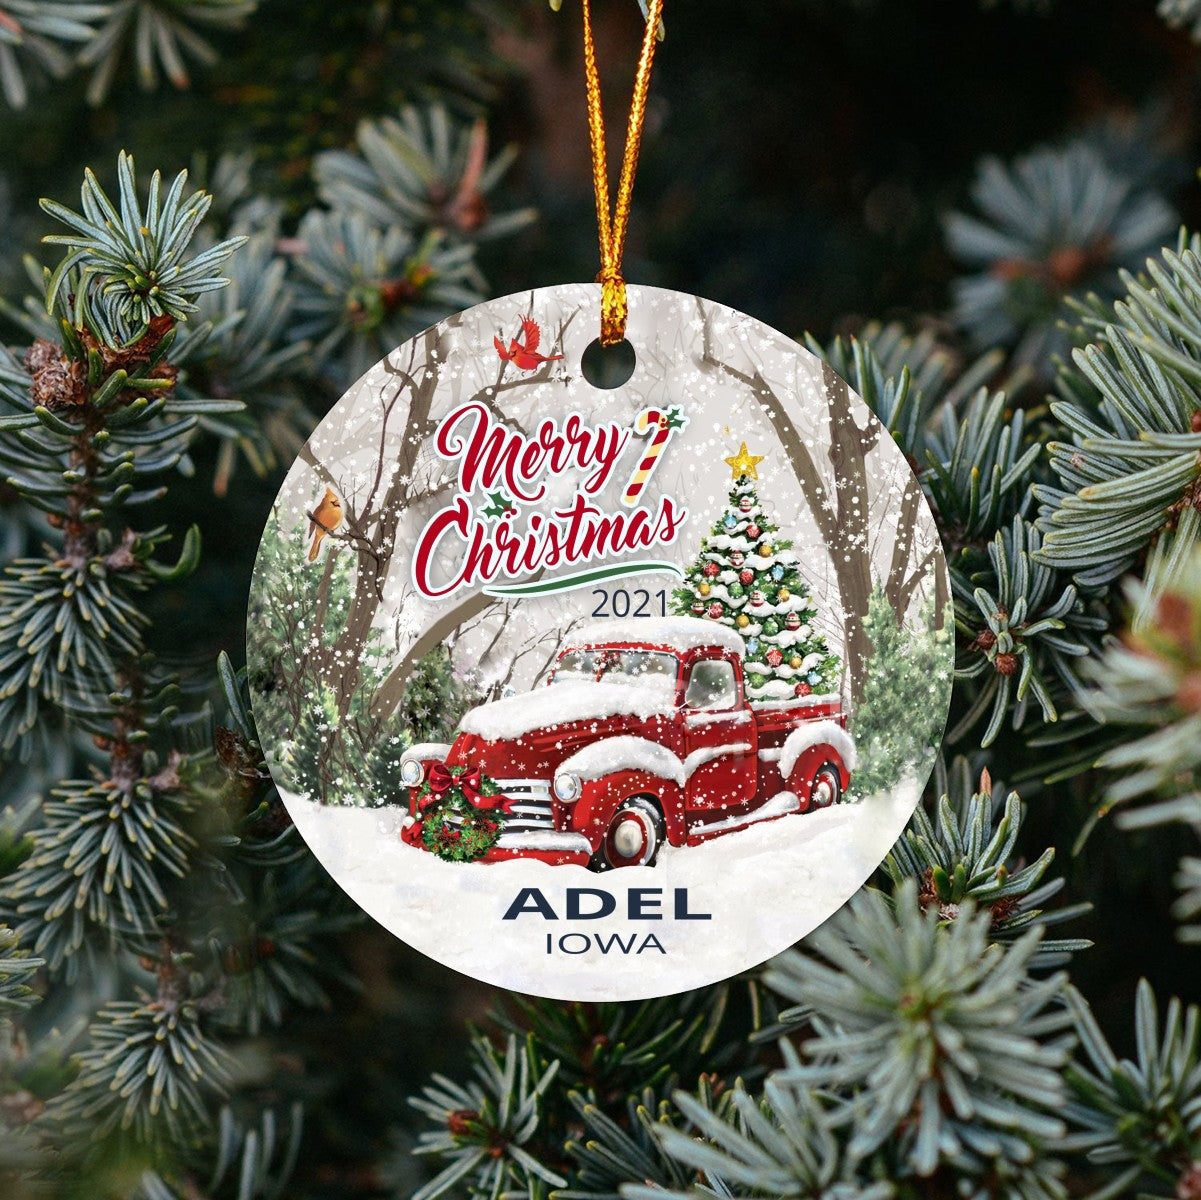 Christmas Tree Ornaments Adel - Ornament With Name City, State Adel Iowa IA Ornament - Red Truck Xmas Ornaments 3'' Plastic Gift For Family, Friend And Housewarming